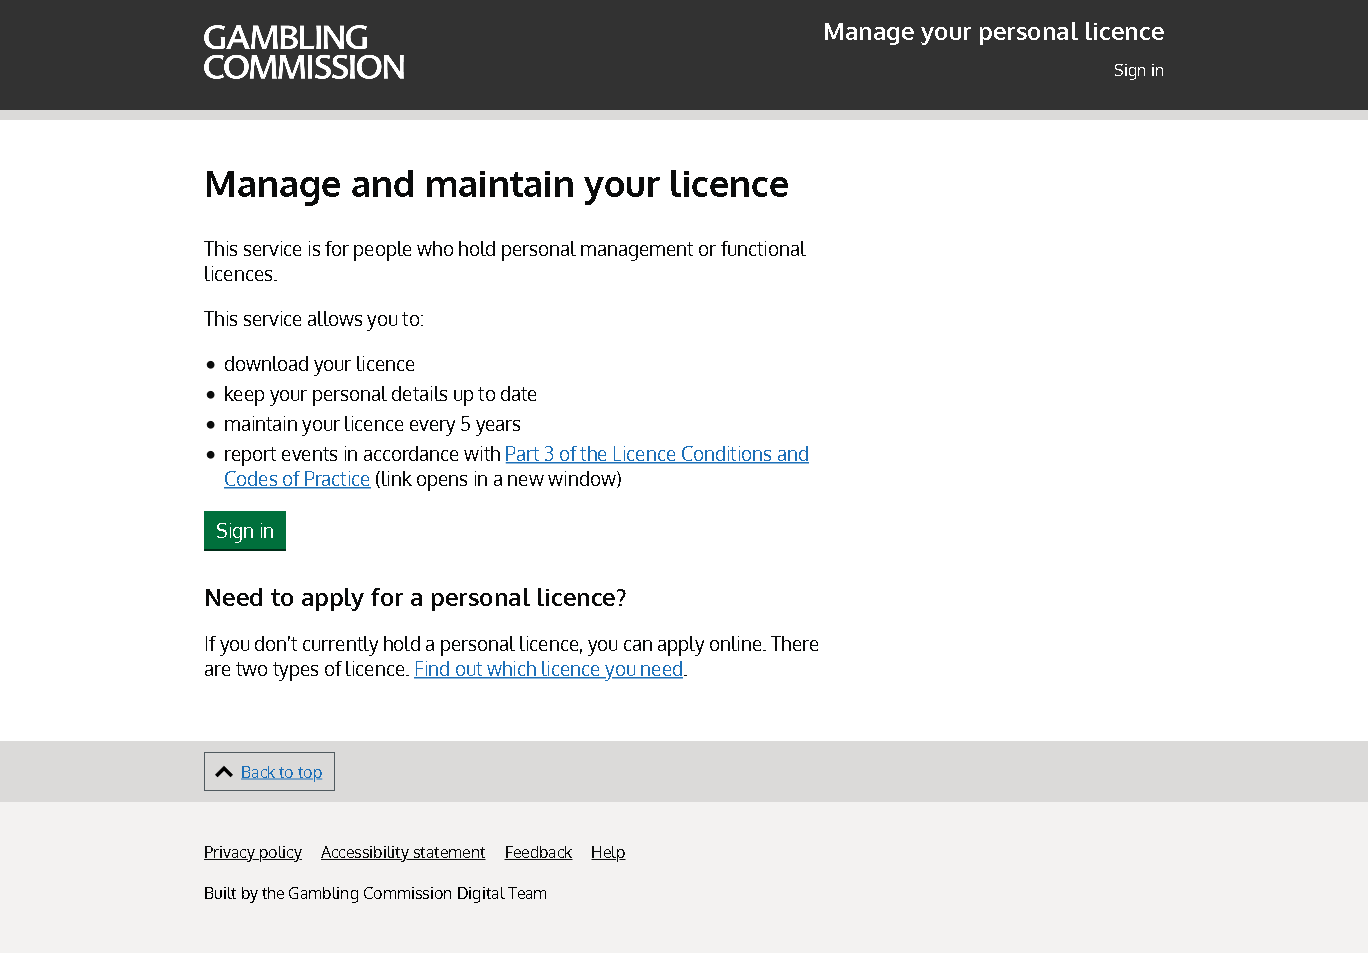 Screenshot of the Manage and Maintain your personal licence service